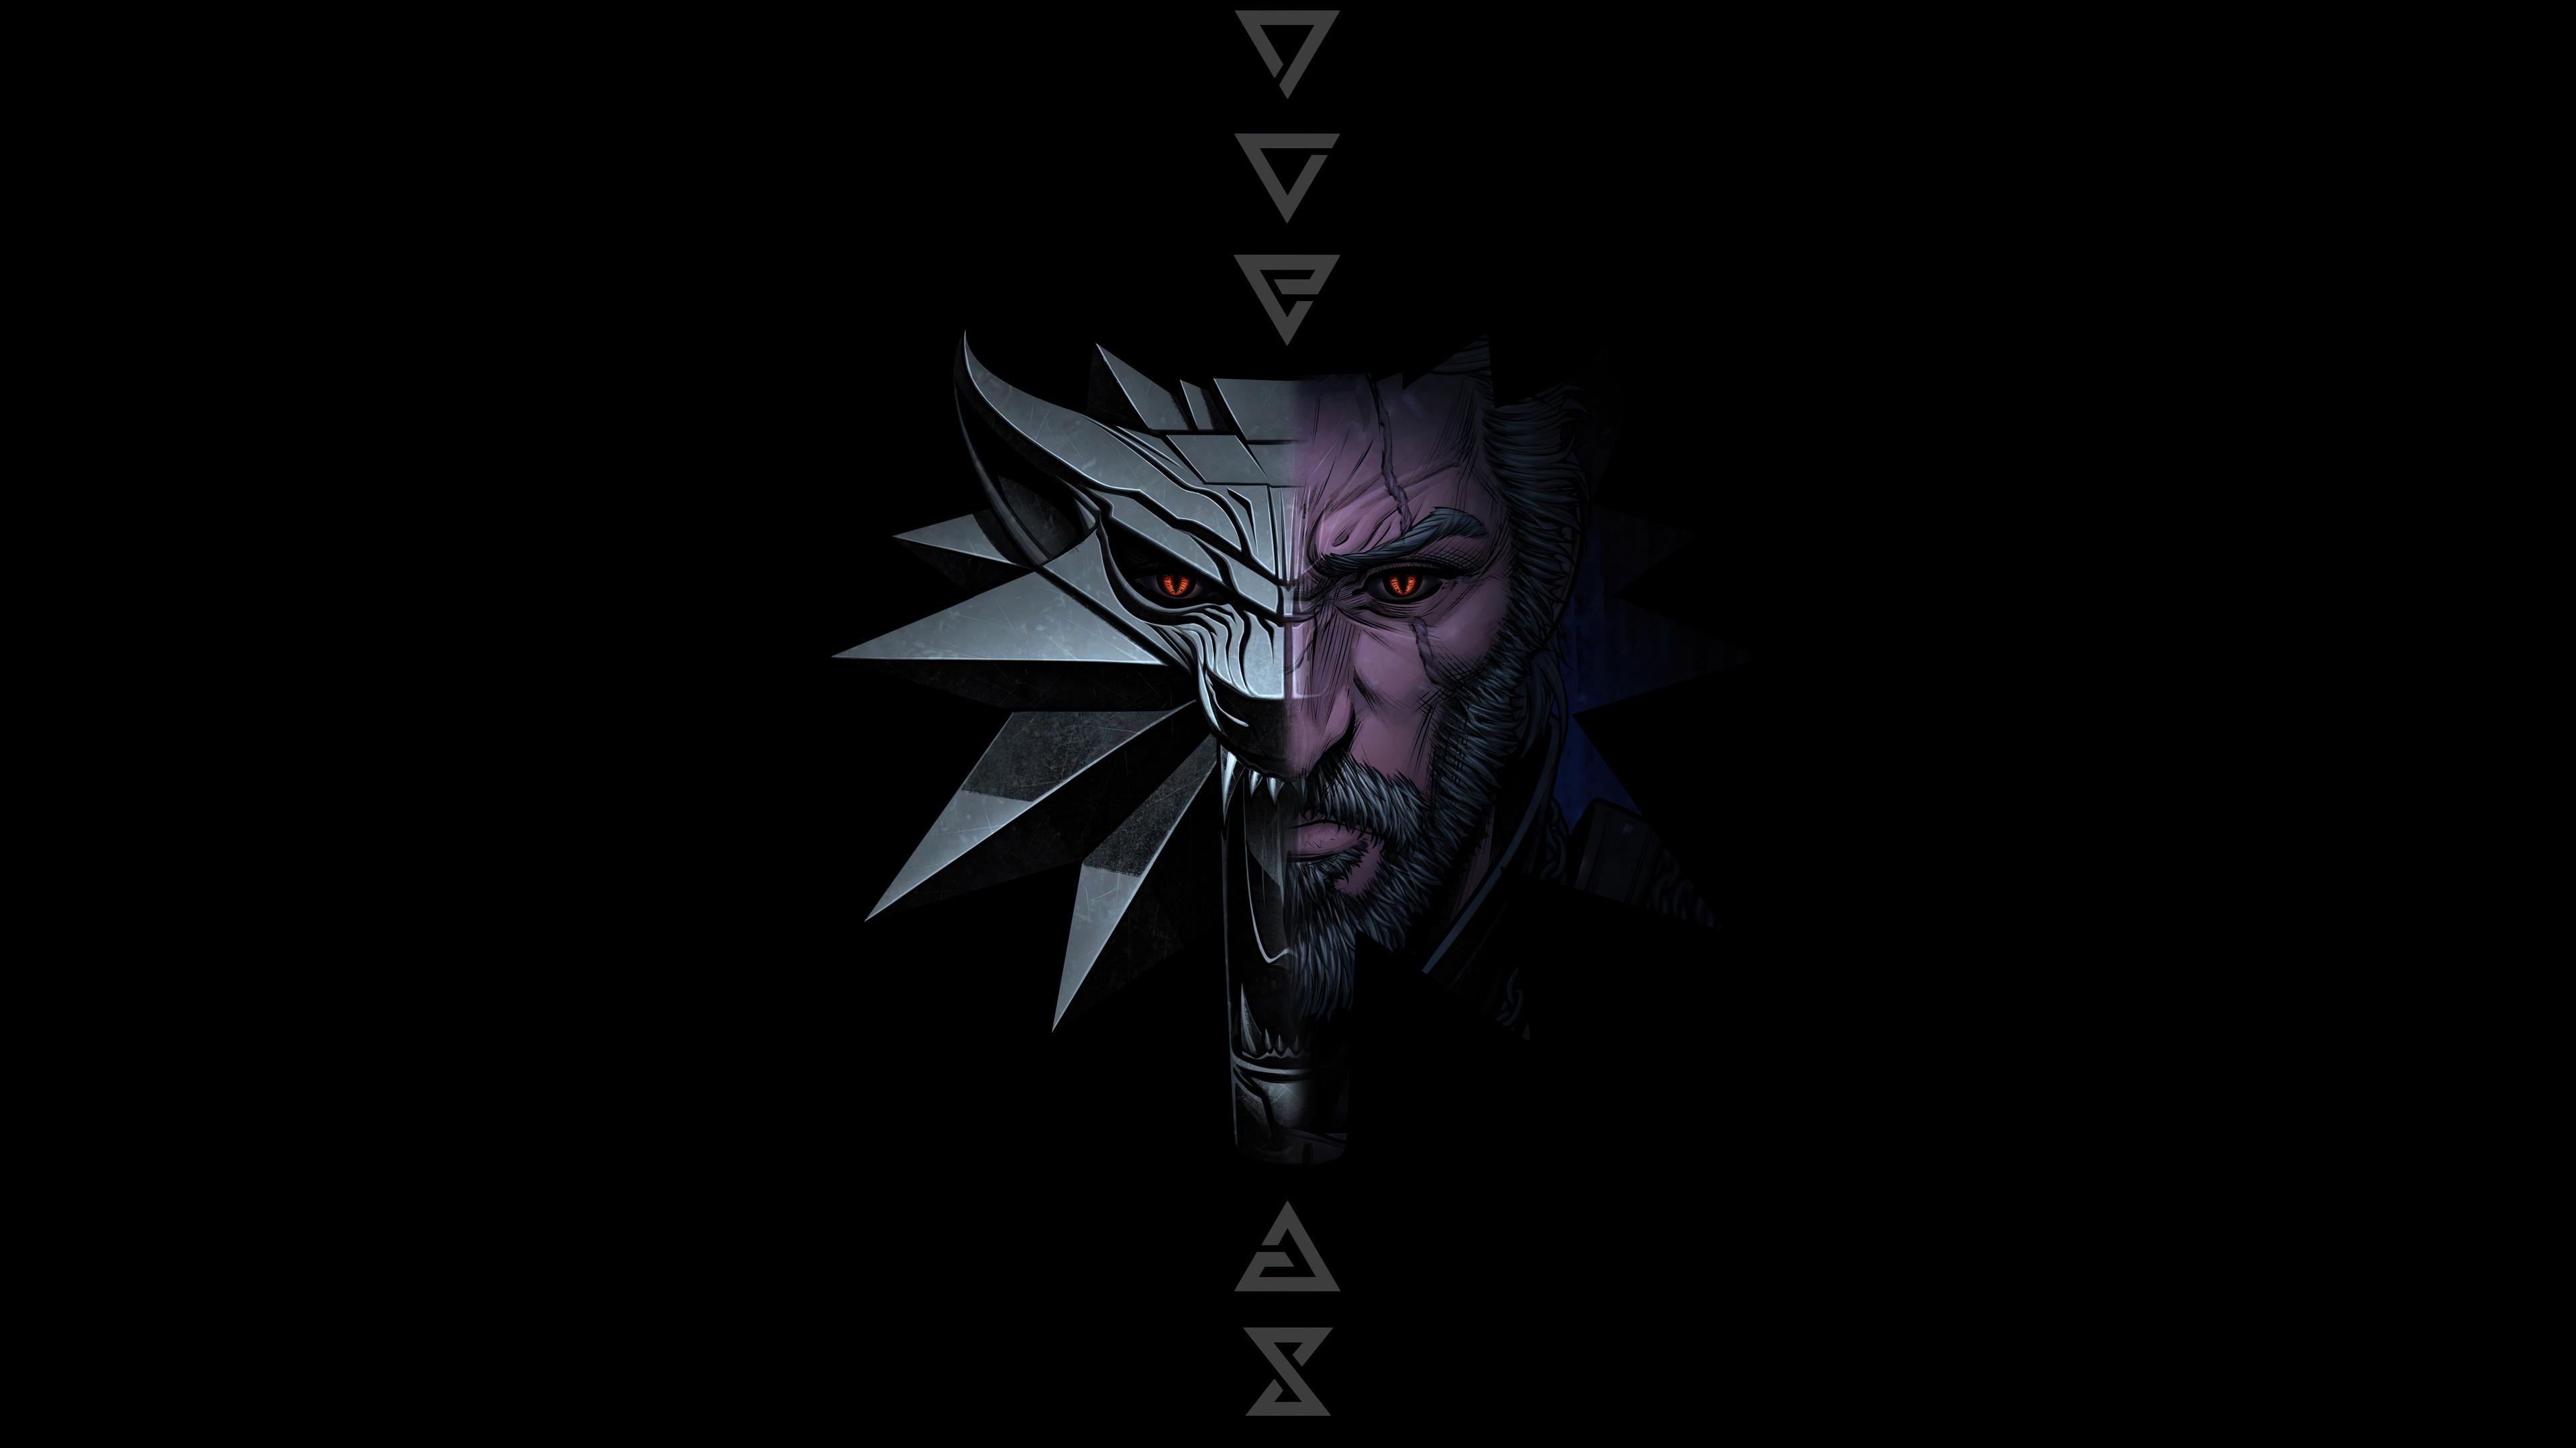 Wallpaper The Witcher Gaming Minimal Art